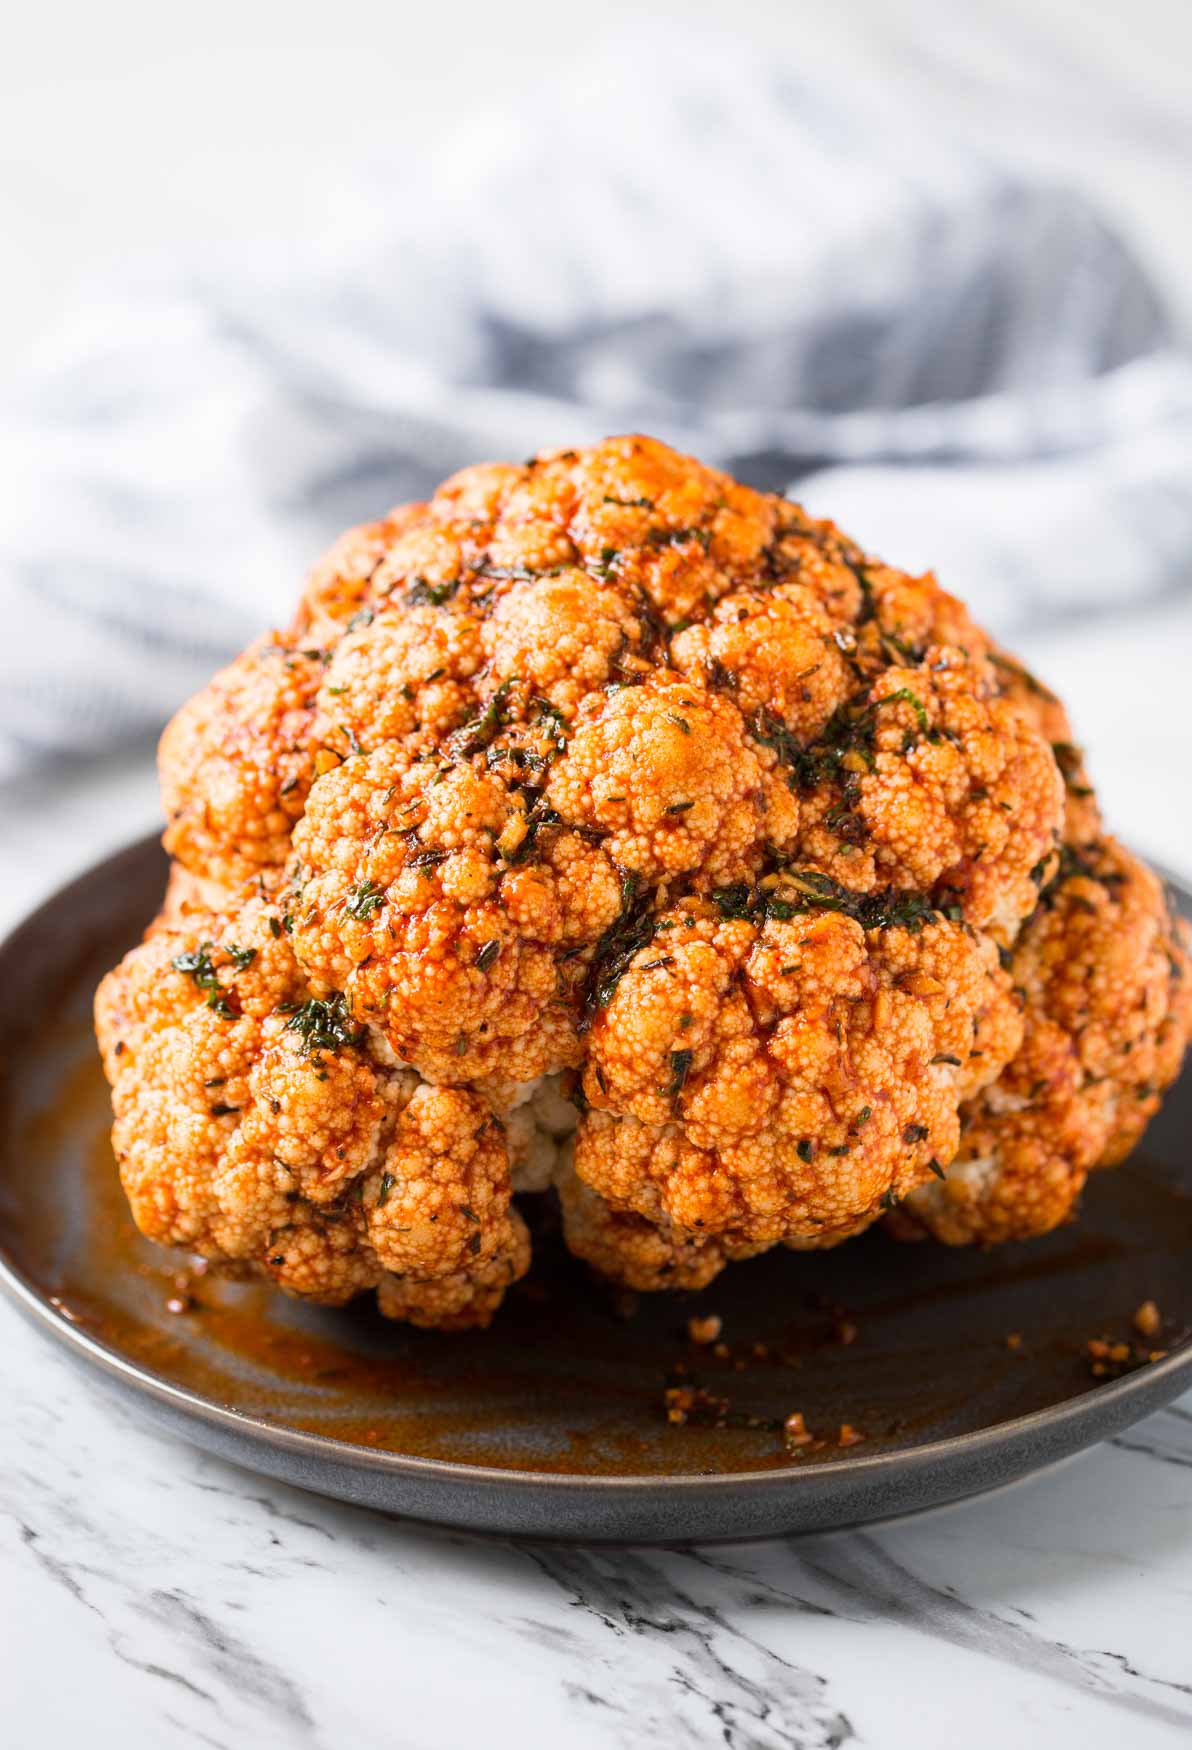 Whole cauliflower head marinated with spice mixture to cook in the Instant Pot.